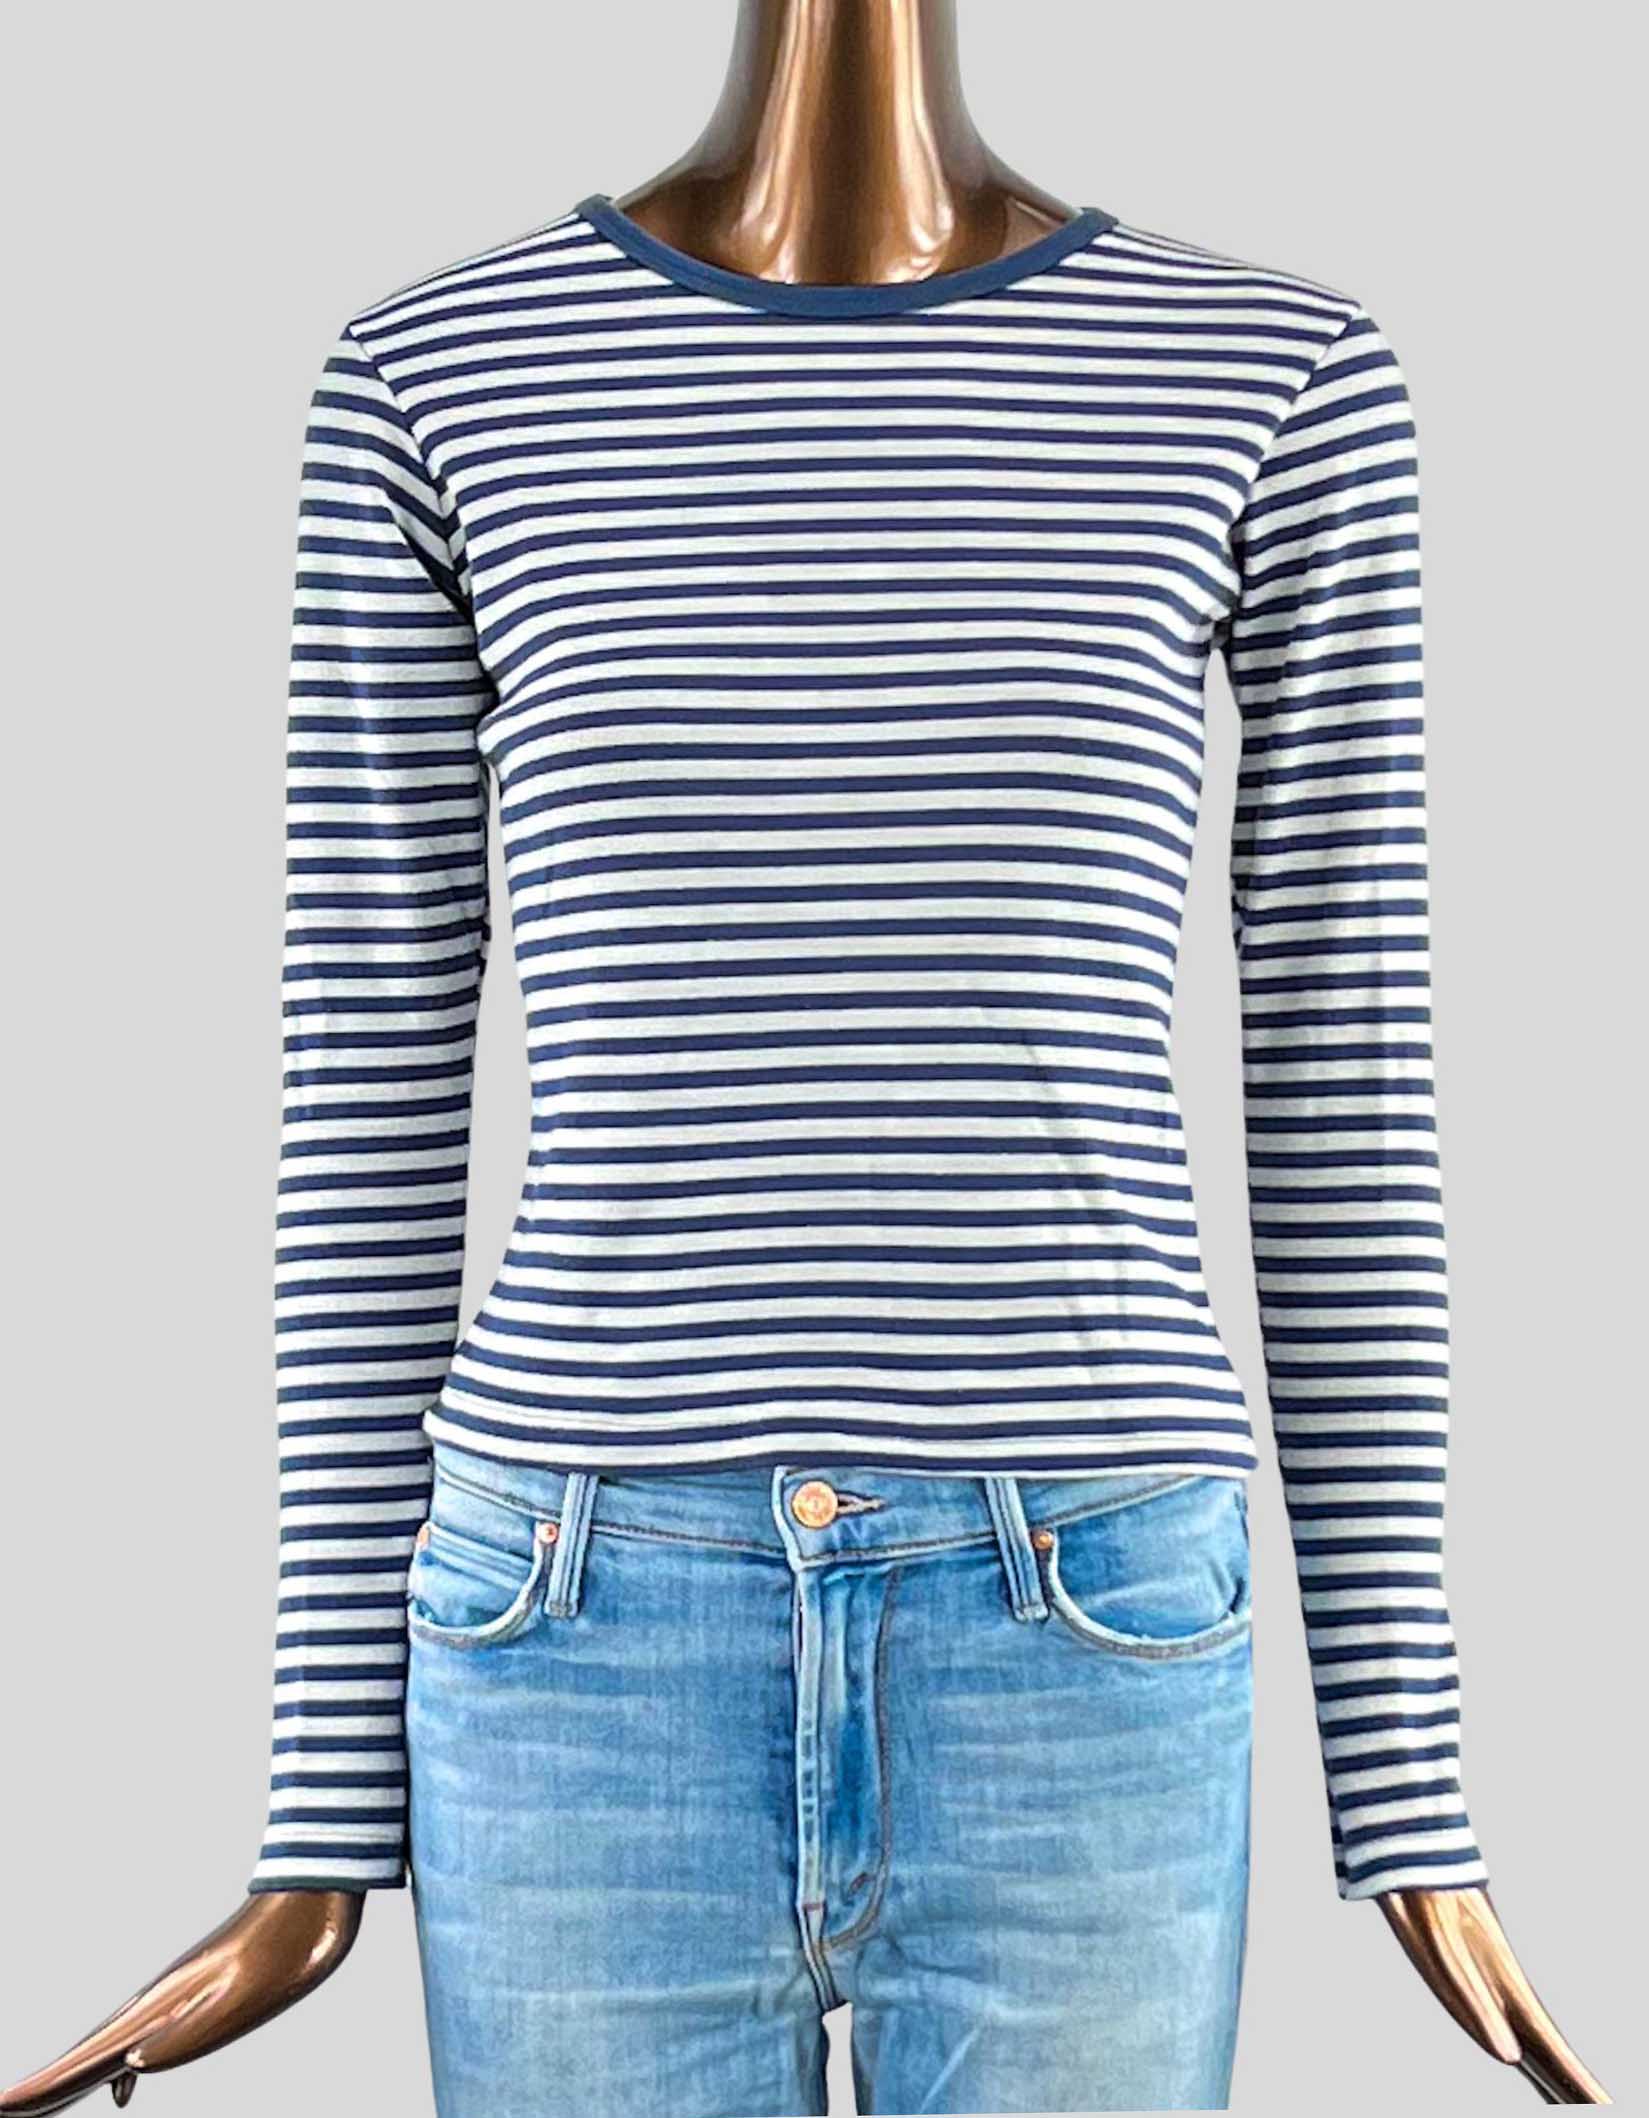 Brandy Melville Striped Shirt - One Size – LuxAnthropy